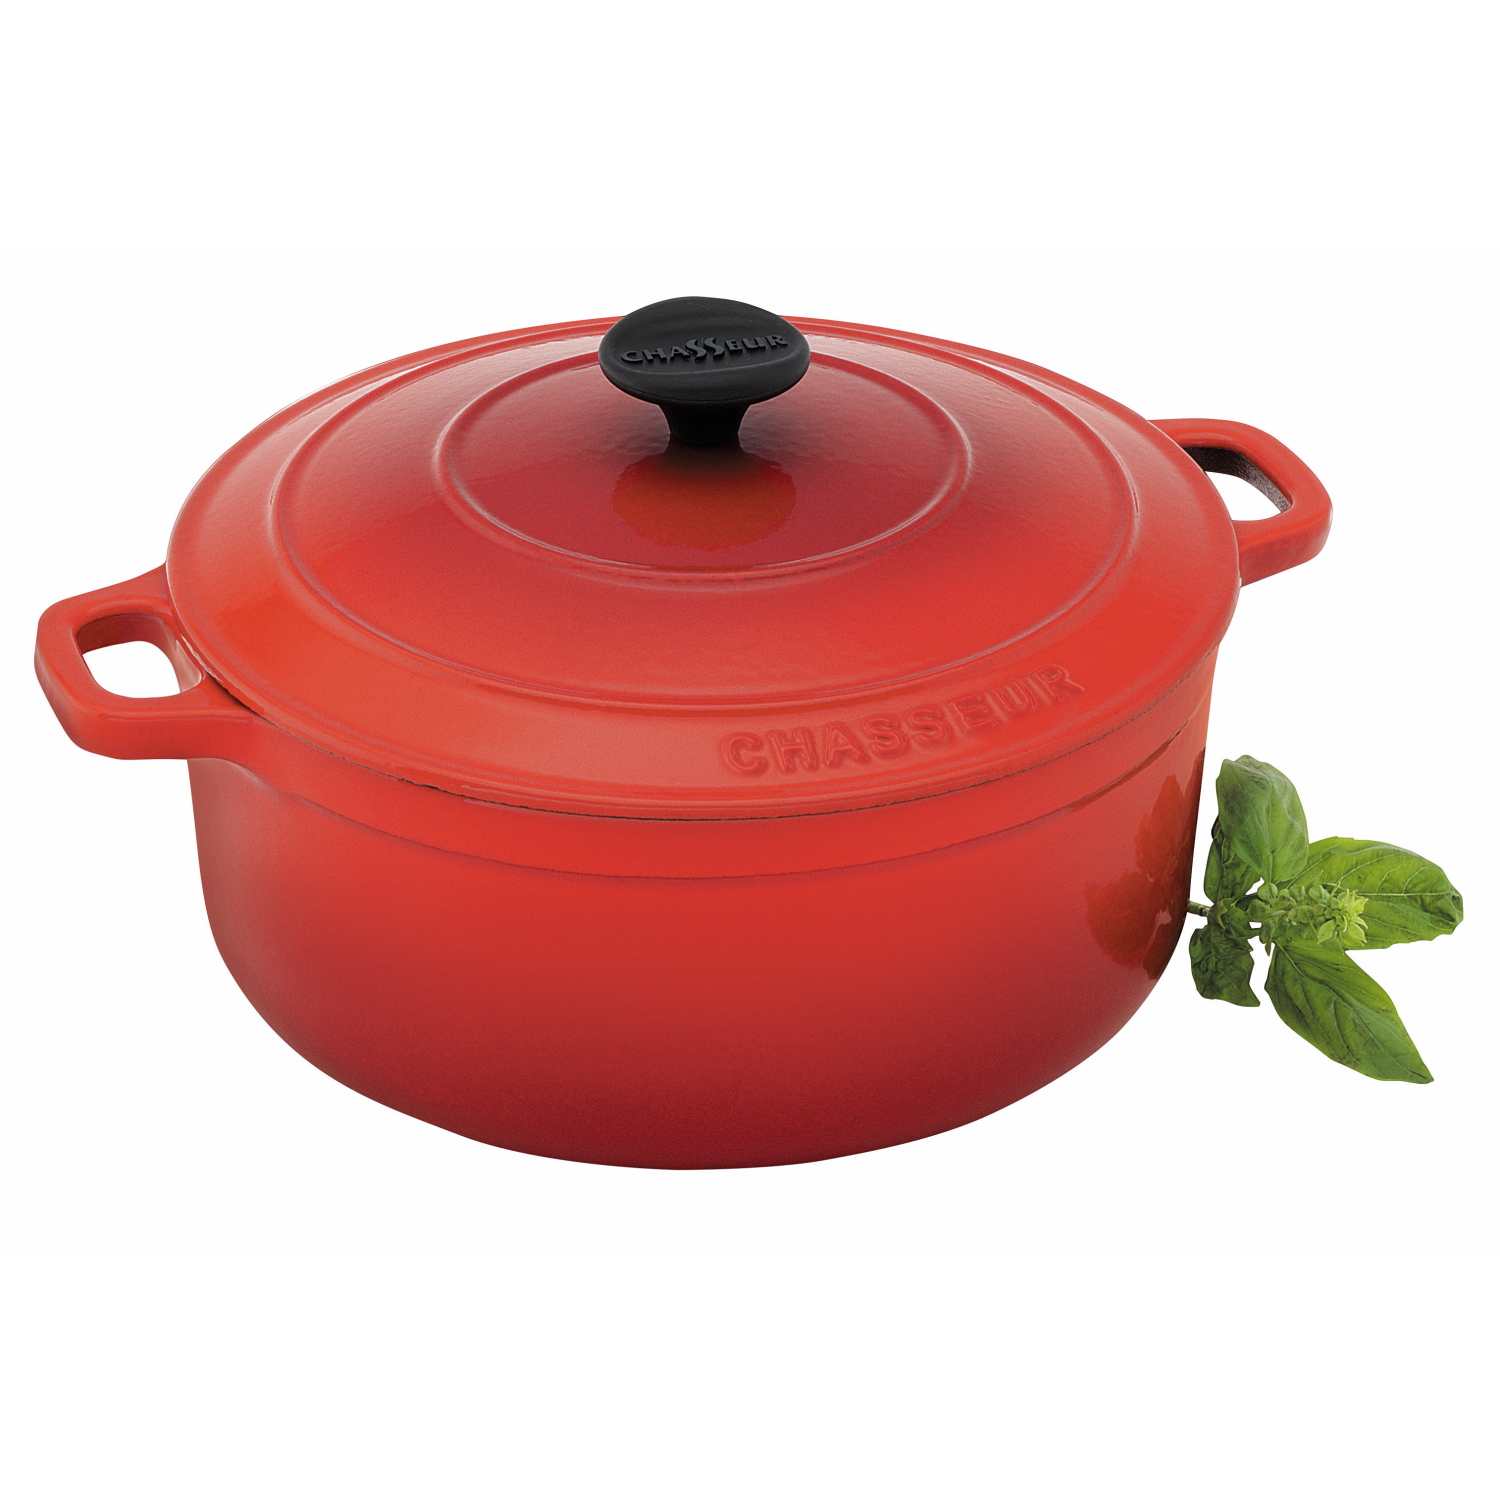 Chasseur Round French Oven 24cm/4L Inf. Red